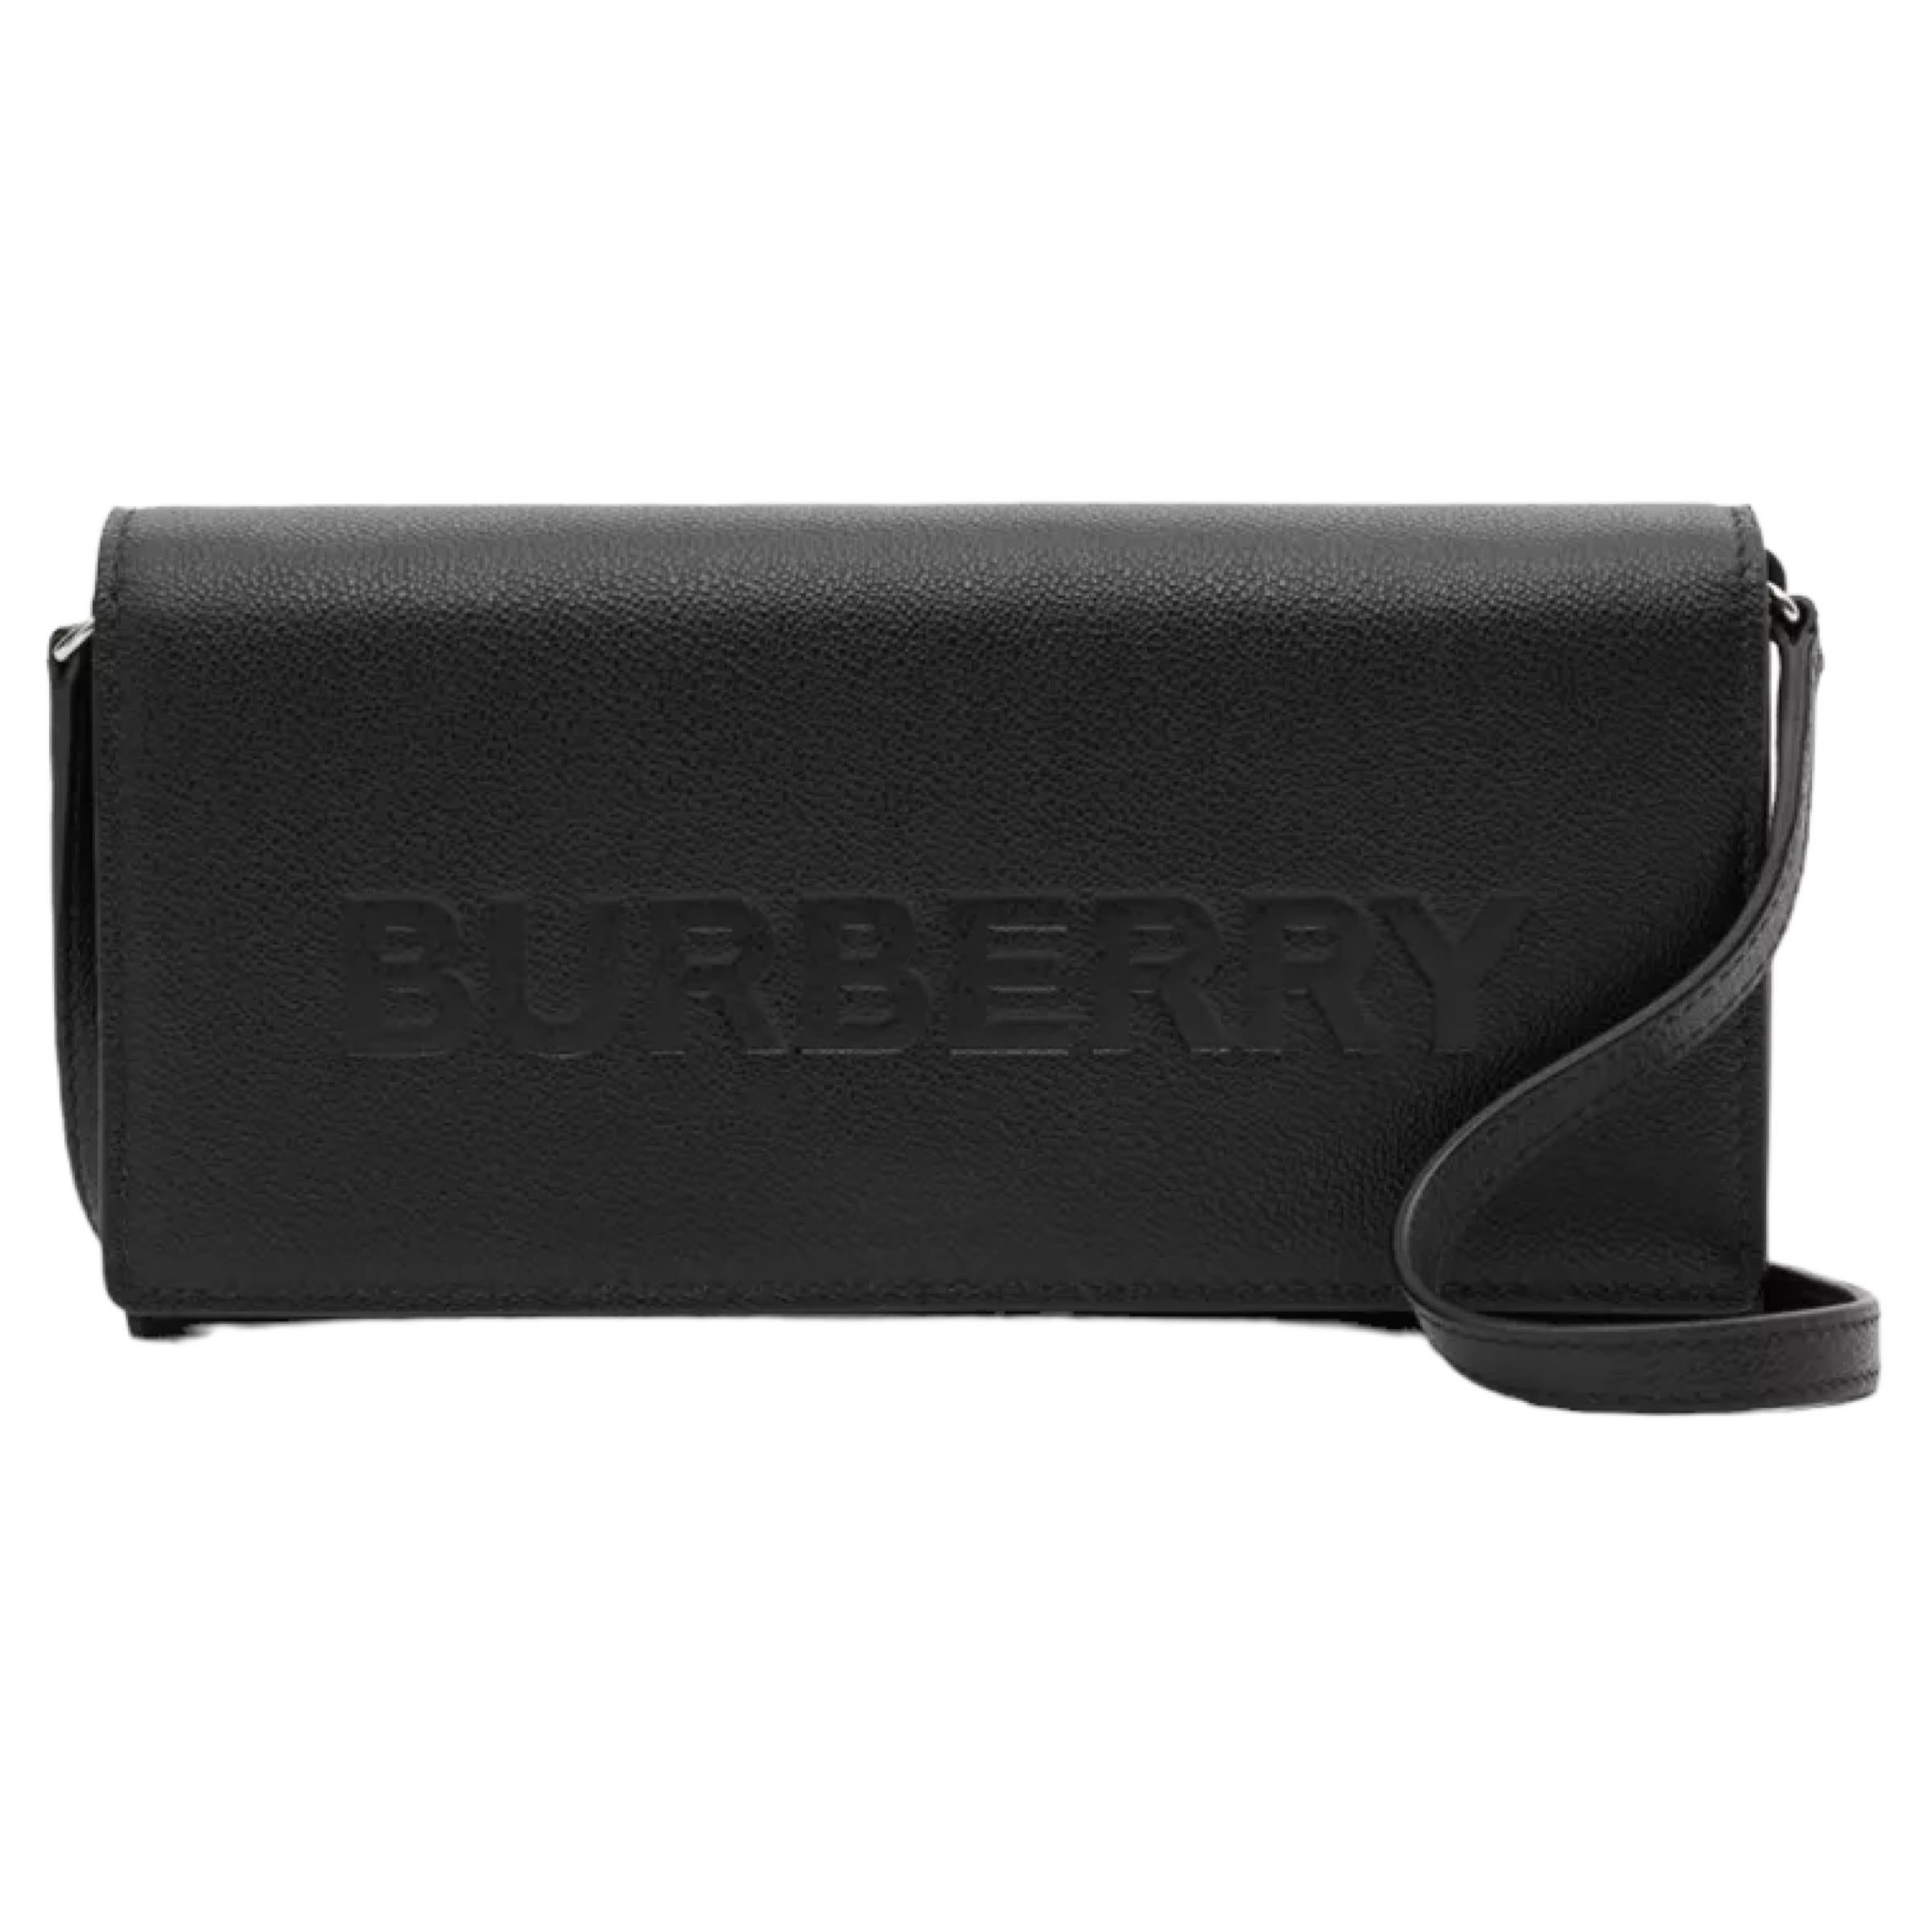 New Burberry Black Embossed Logo Leather Wallet on Chain Crossbody Bag

Authenticity Guaranteed

DETAILS
Brand: Burberry
Condition: Brand new
Gender: Unisex
Category: Crossbody bag
Color: Black
Material: Leather
Front logo emboss
Silver-tone